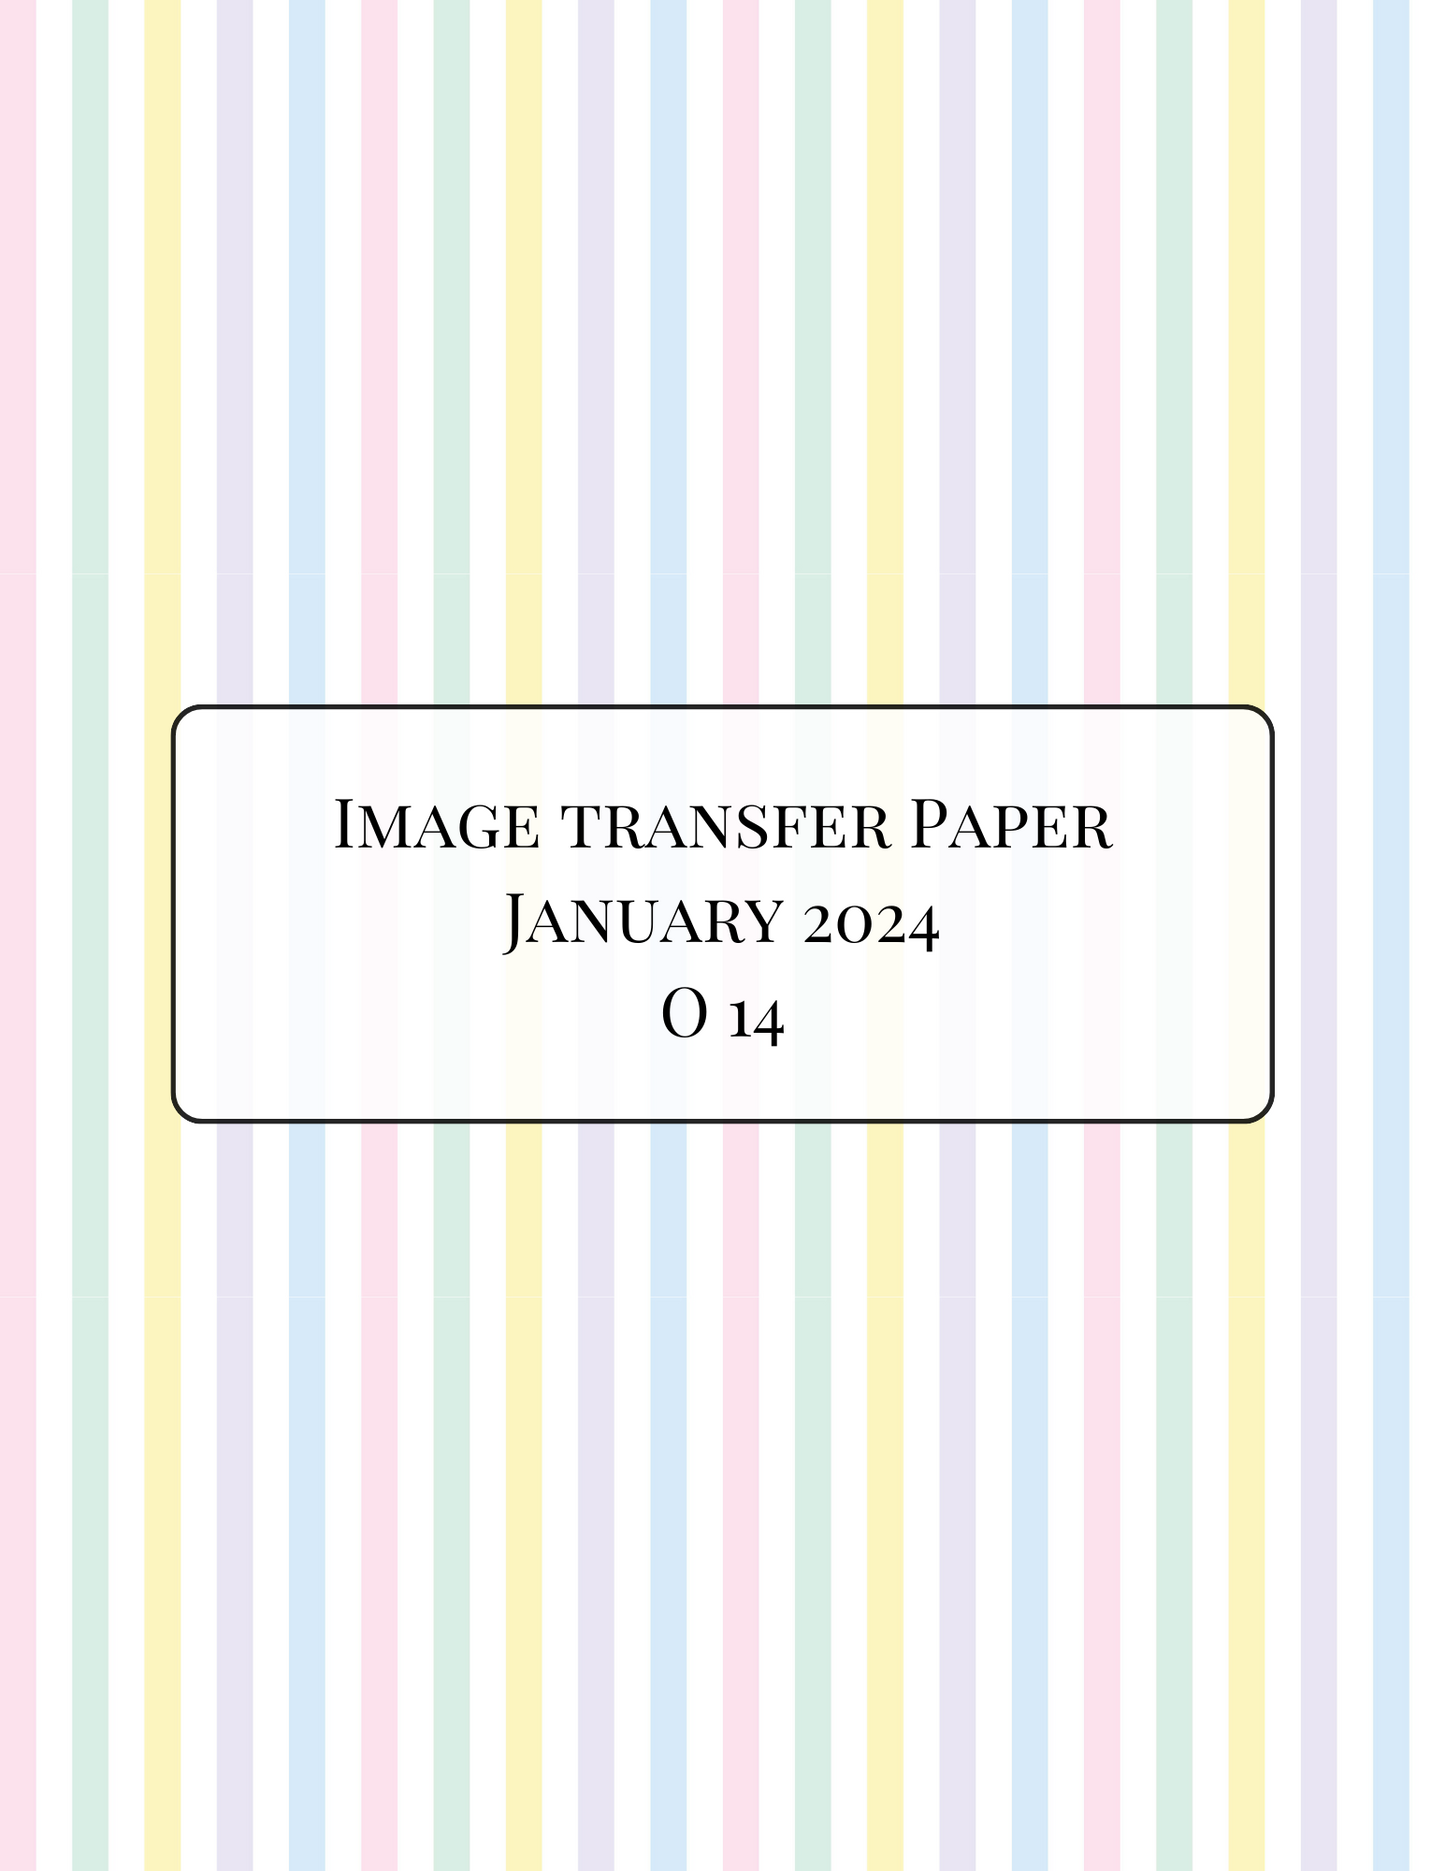 O14 Transfer Paper - January Launch